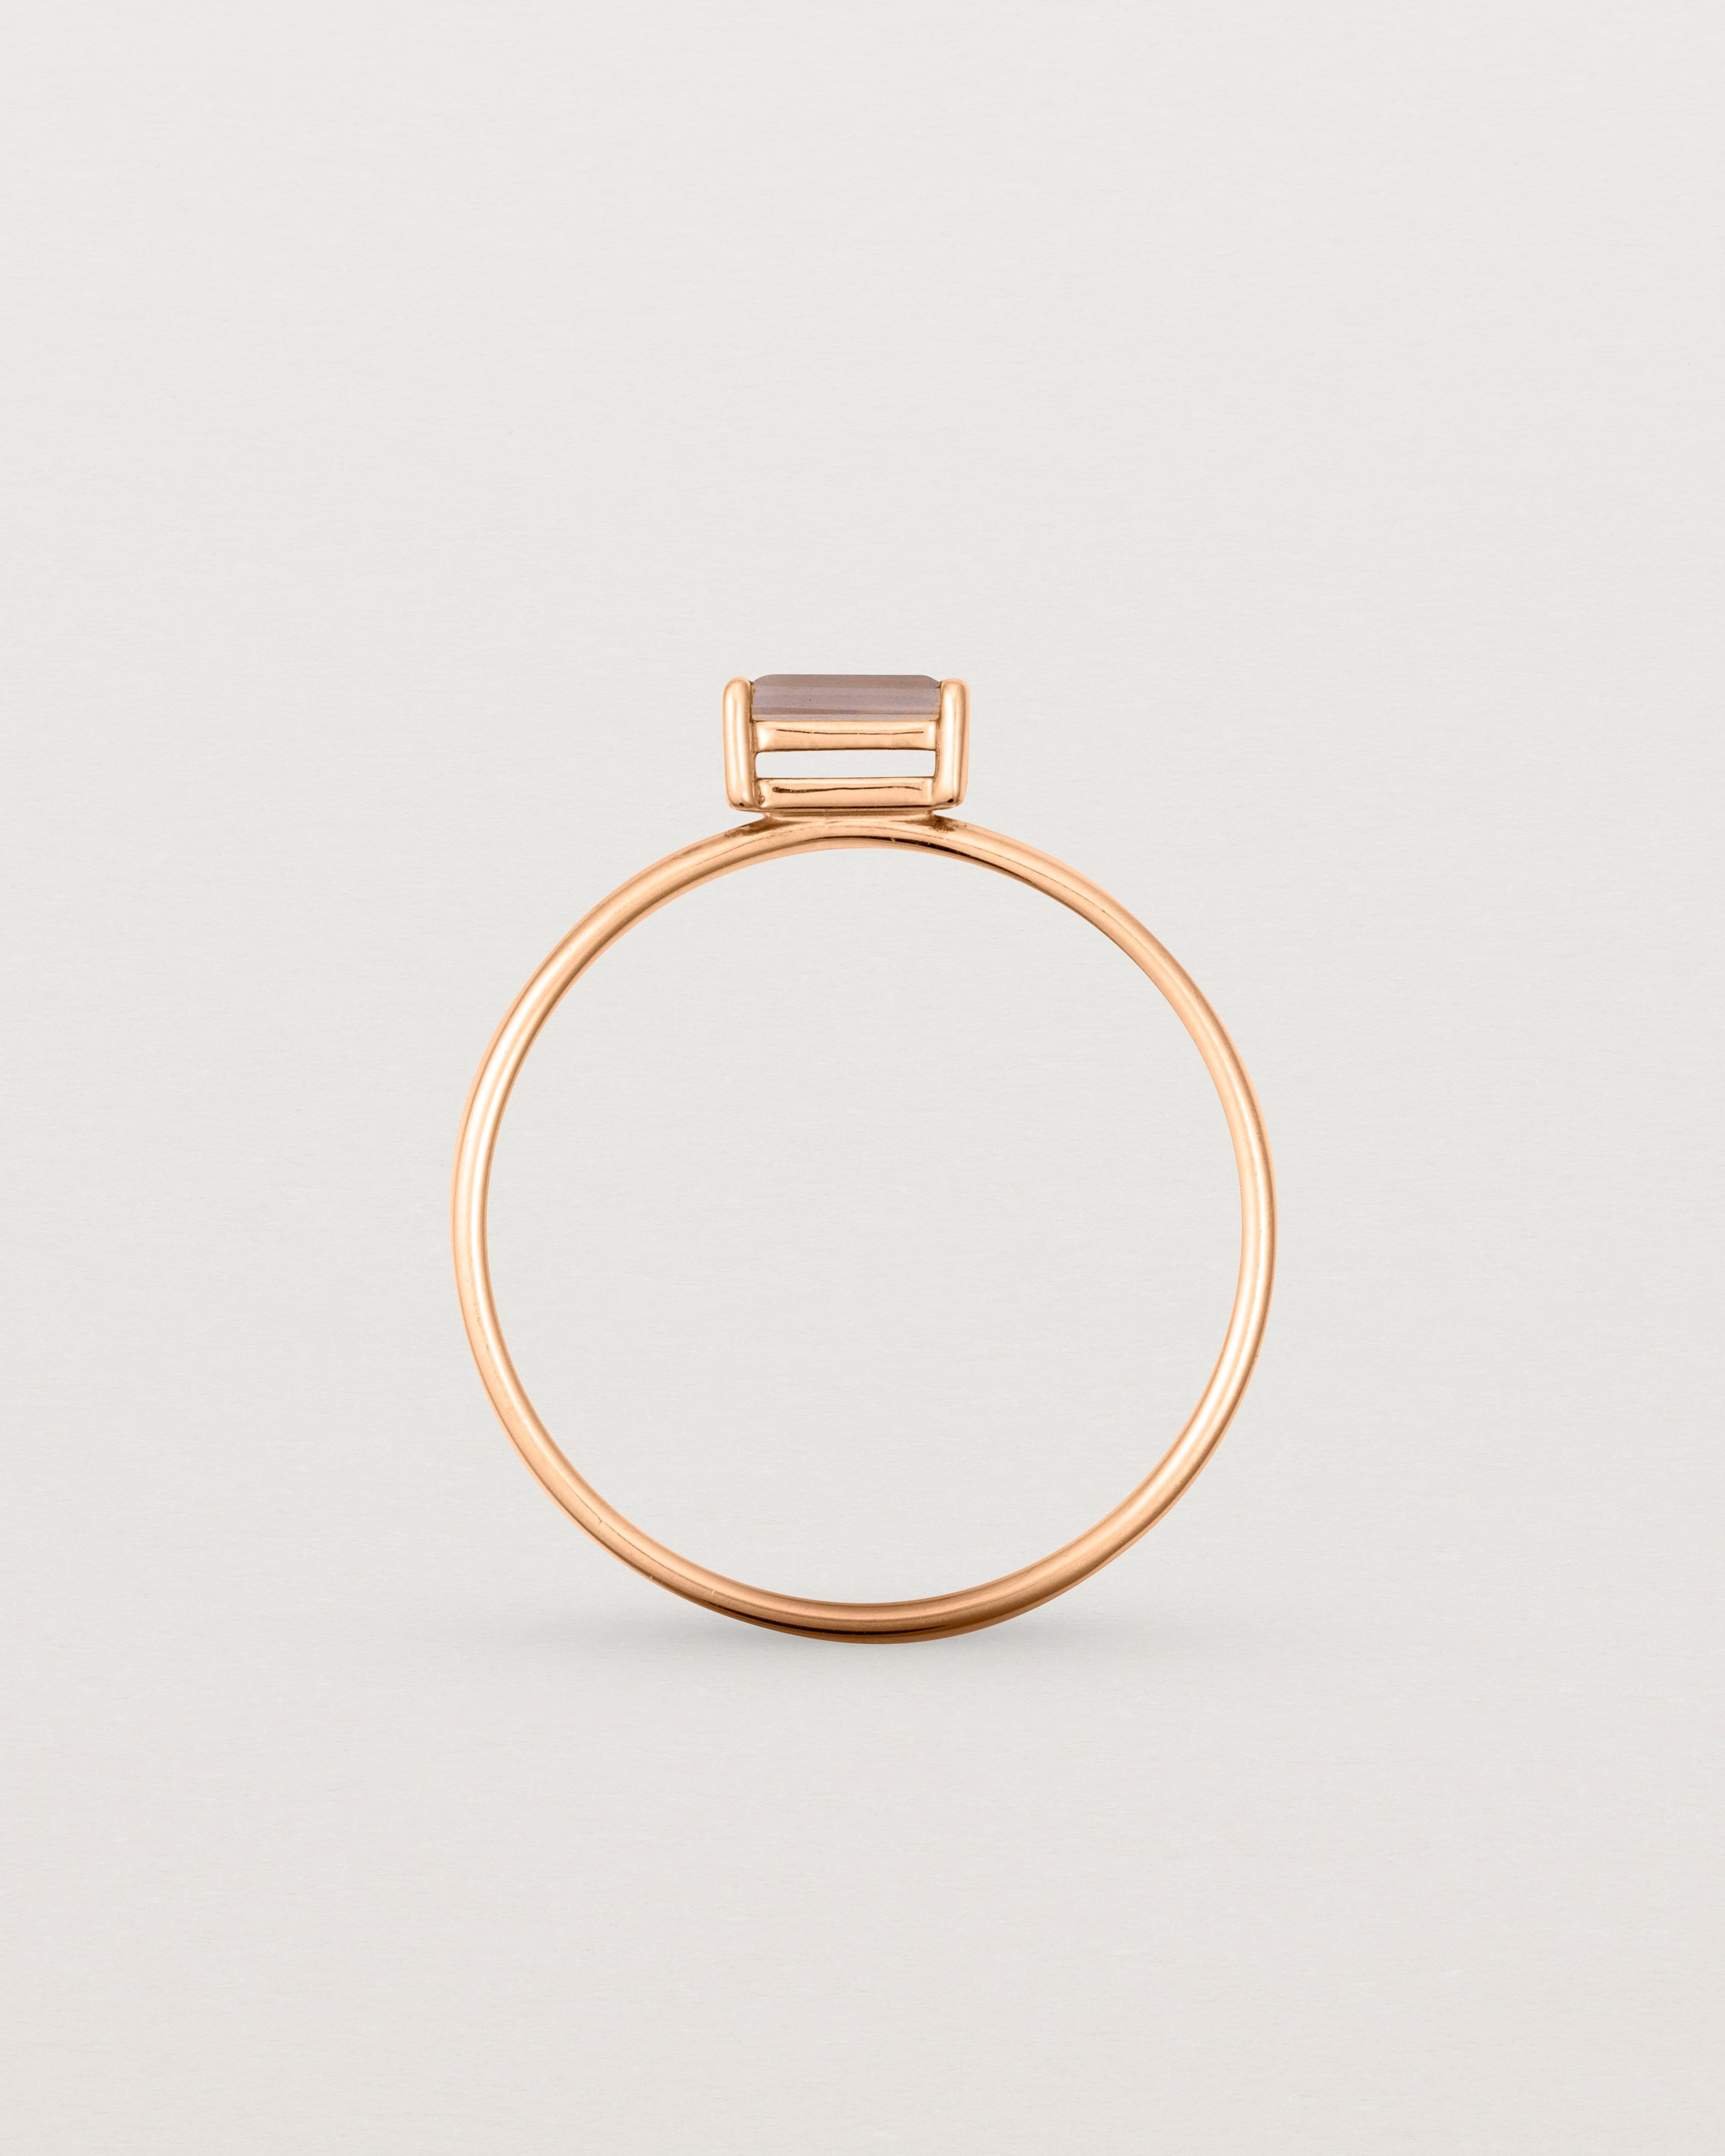 Standing view of the Horizontal Baguette Ring | Smokey Quartz in Rose Gold.